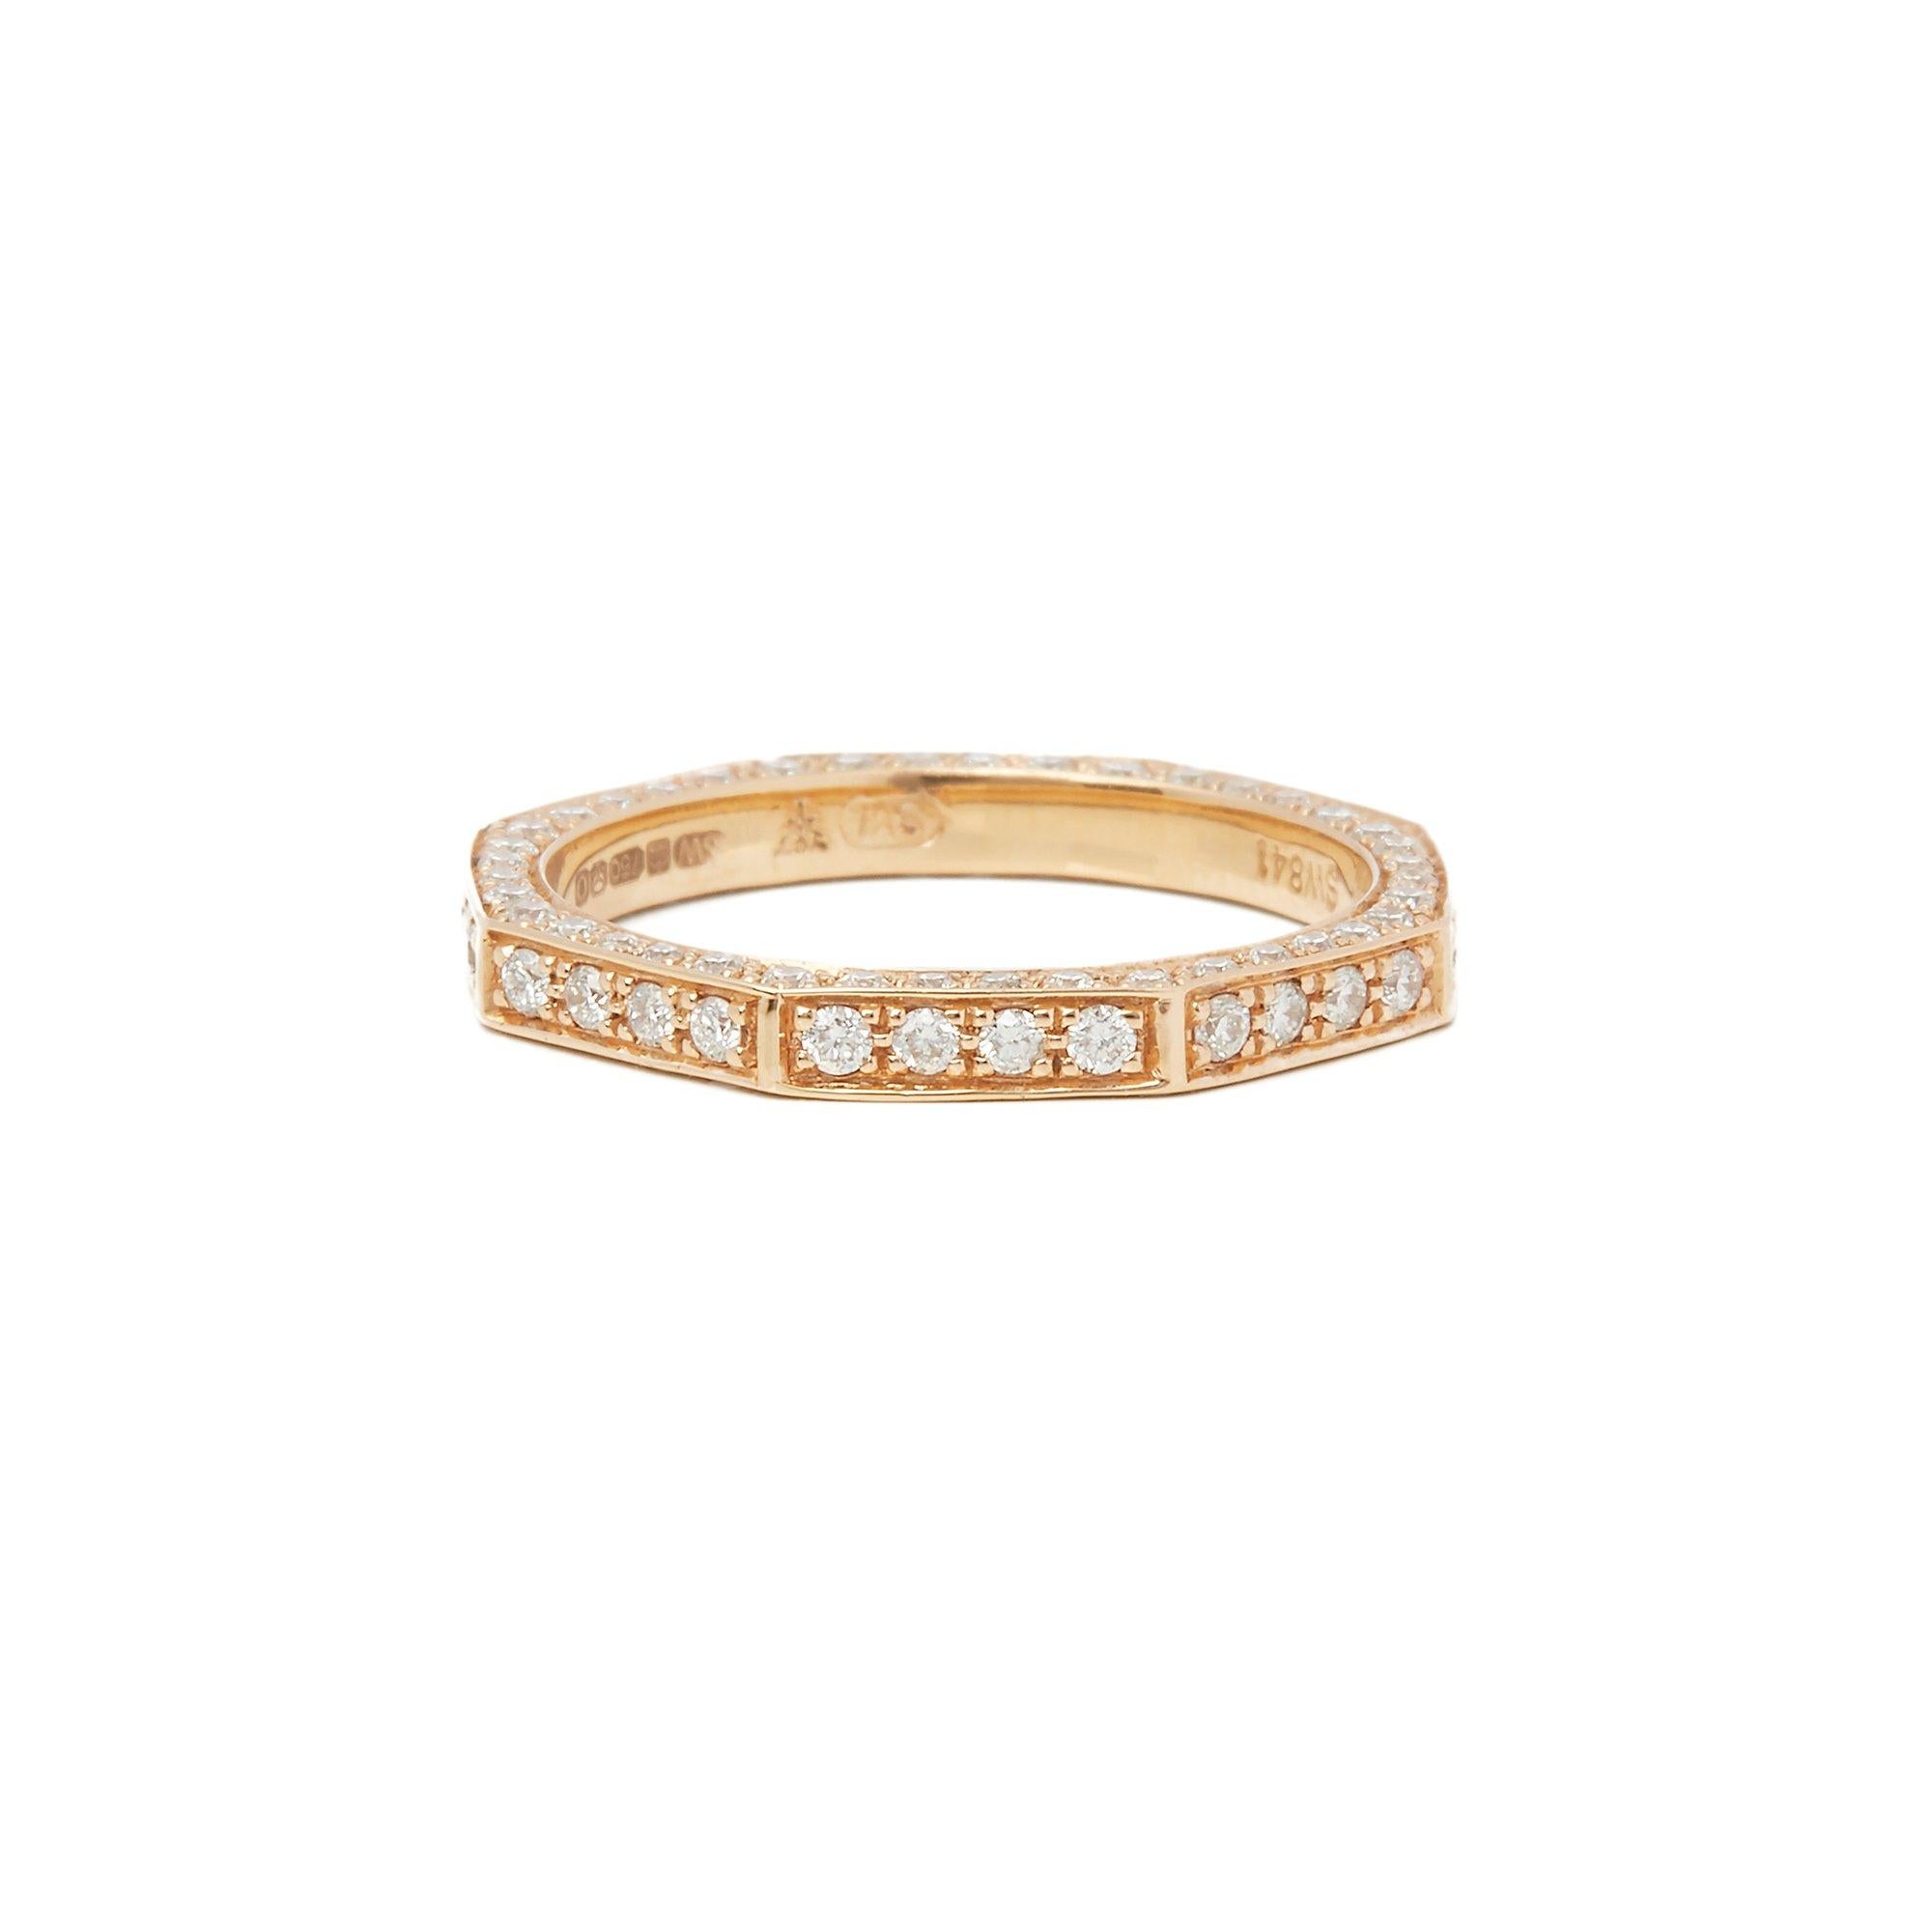 This Ring by Stephen Webster is from his Deco Collection and features One Hundred and Ten Round Brilliant Diamonds Totalling 1.10cts in an Octagonal Design. Set in 18k Yellow Gold. Finger Size UK L, EU Size 52, USA Size 6. Complete with Xupes